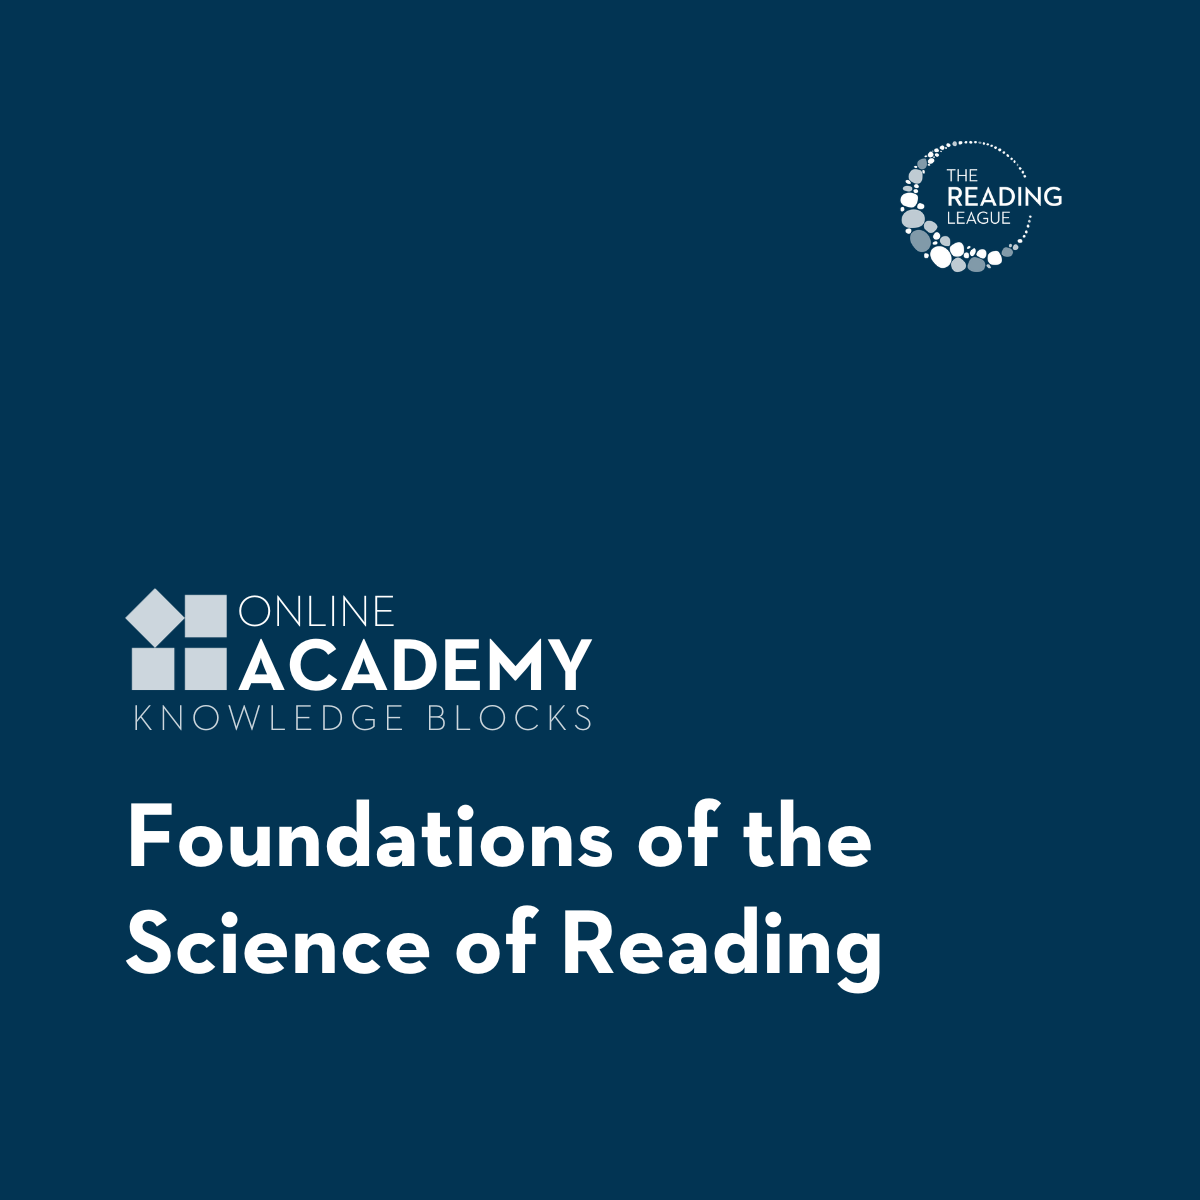 Foundations of the Science of Reading